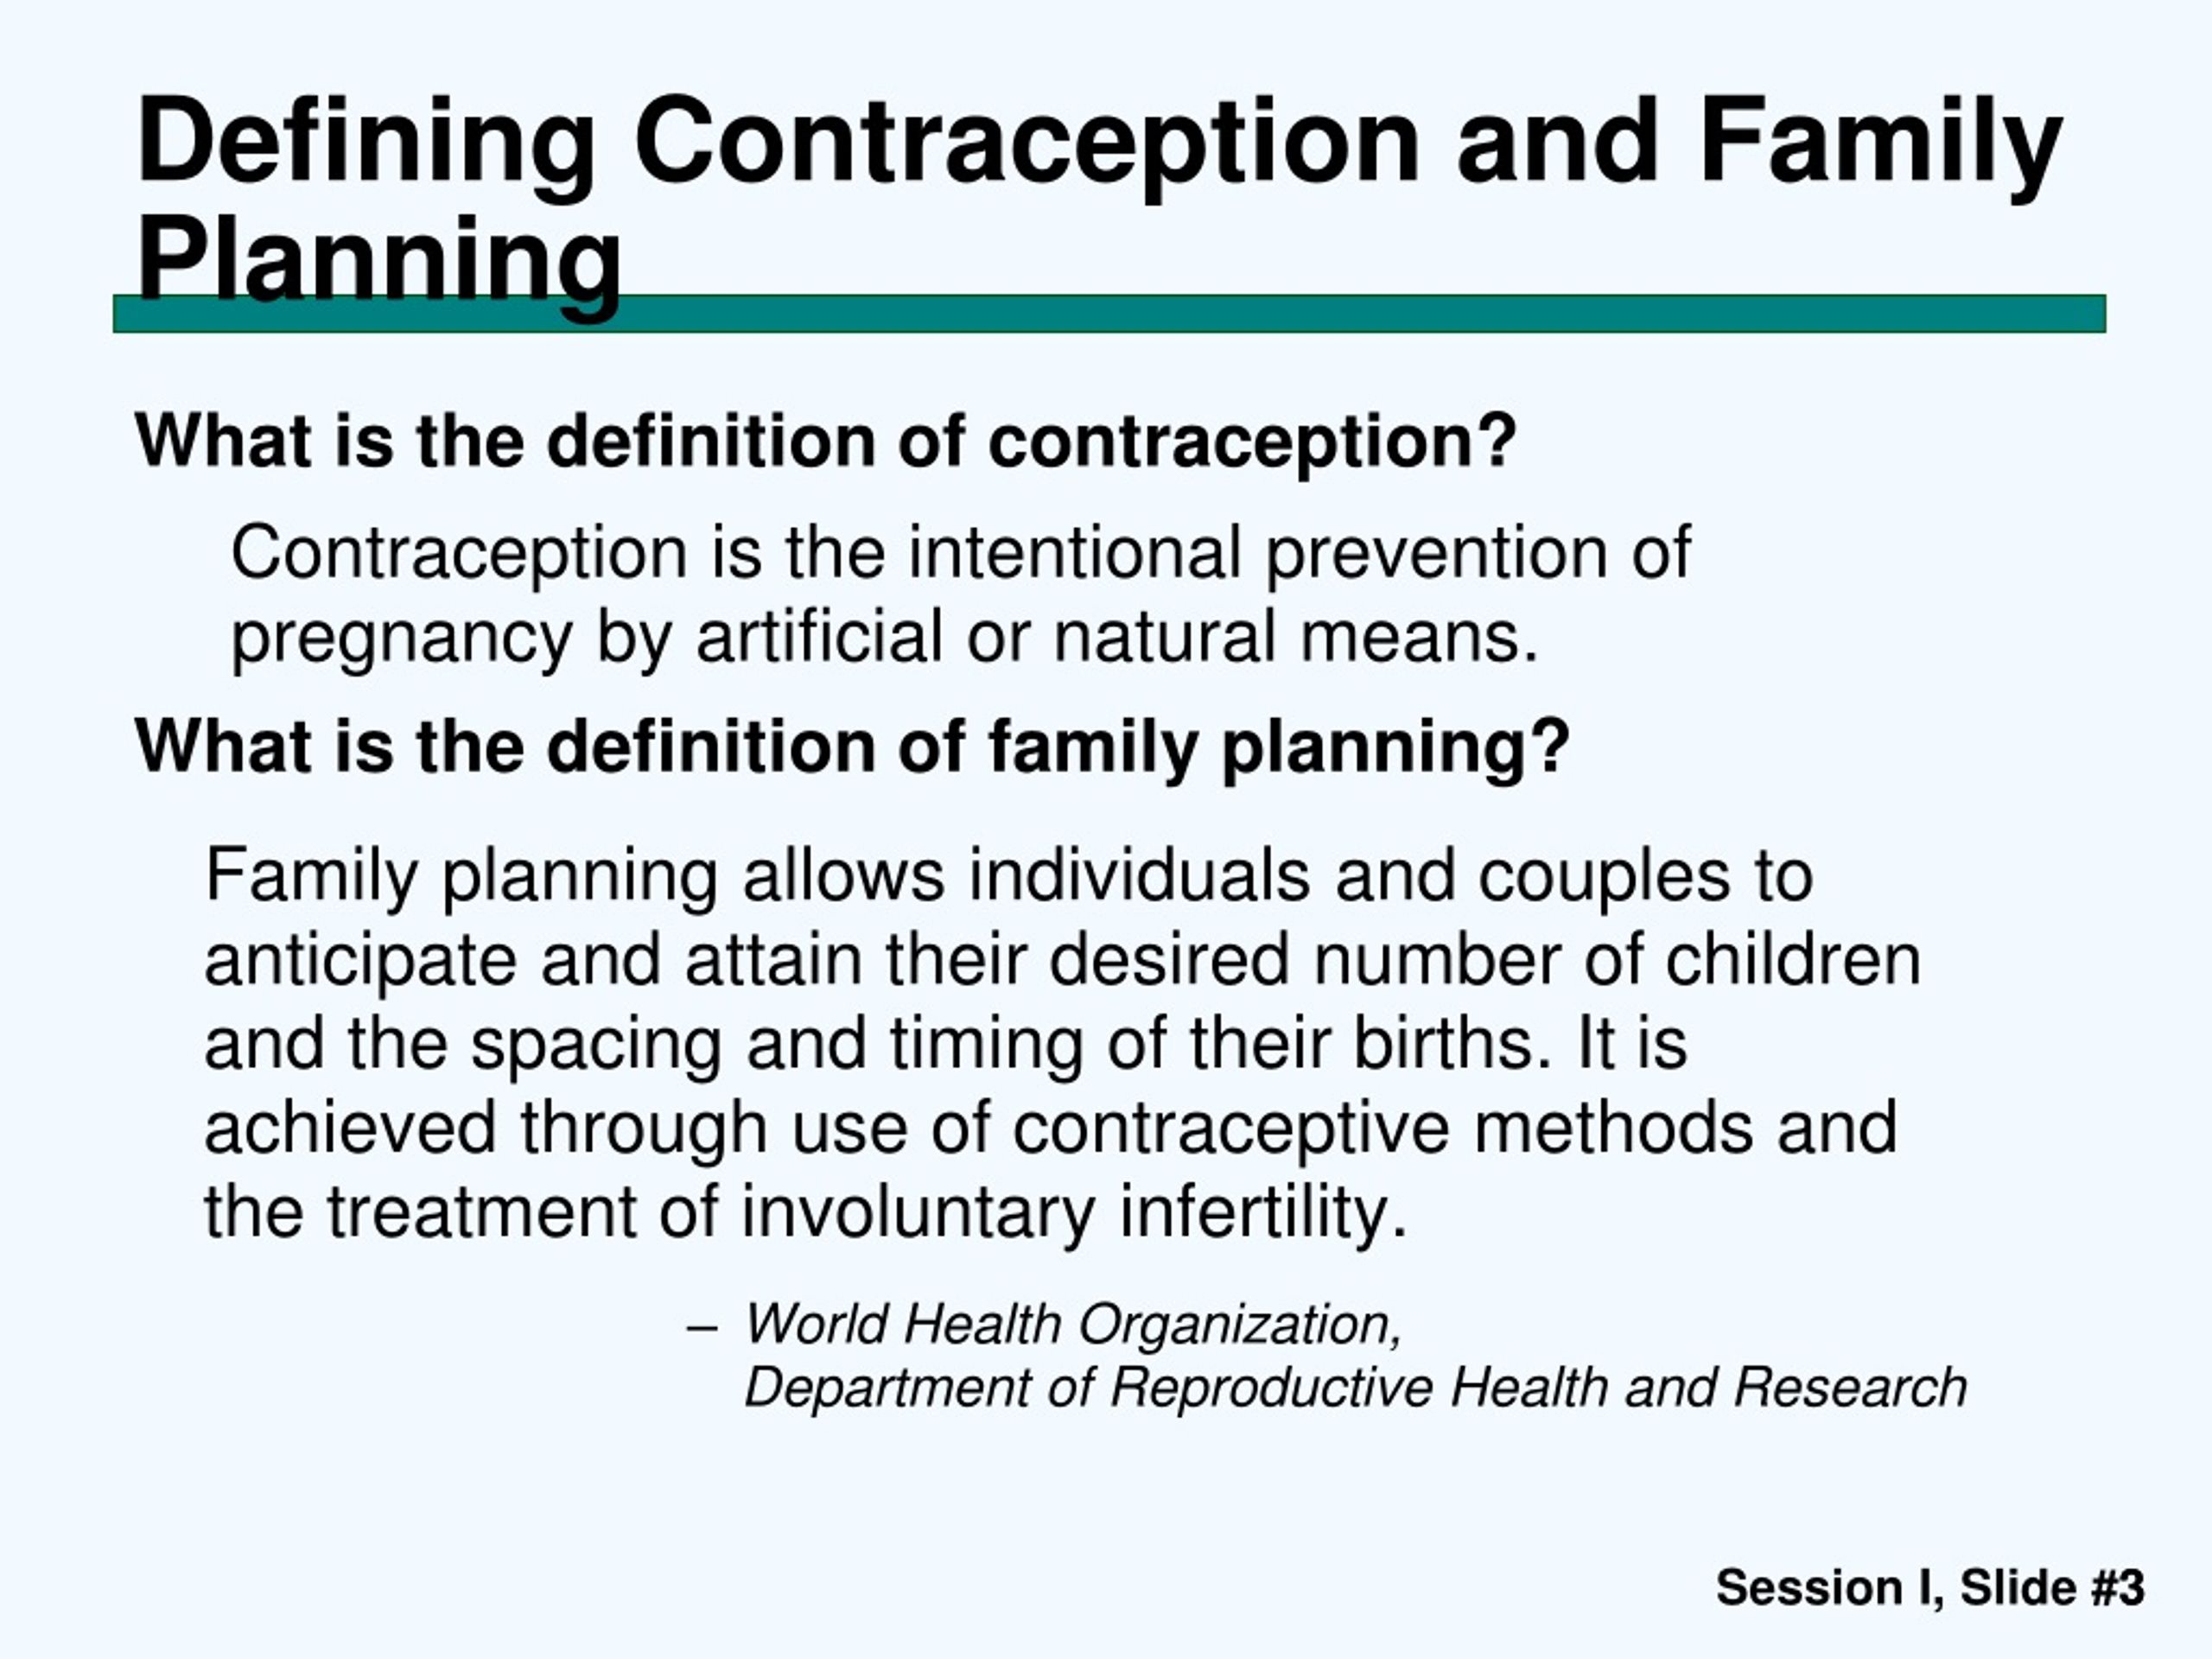 family planning definition essay